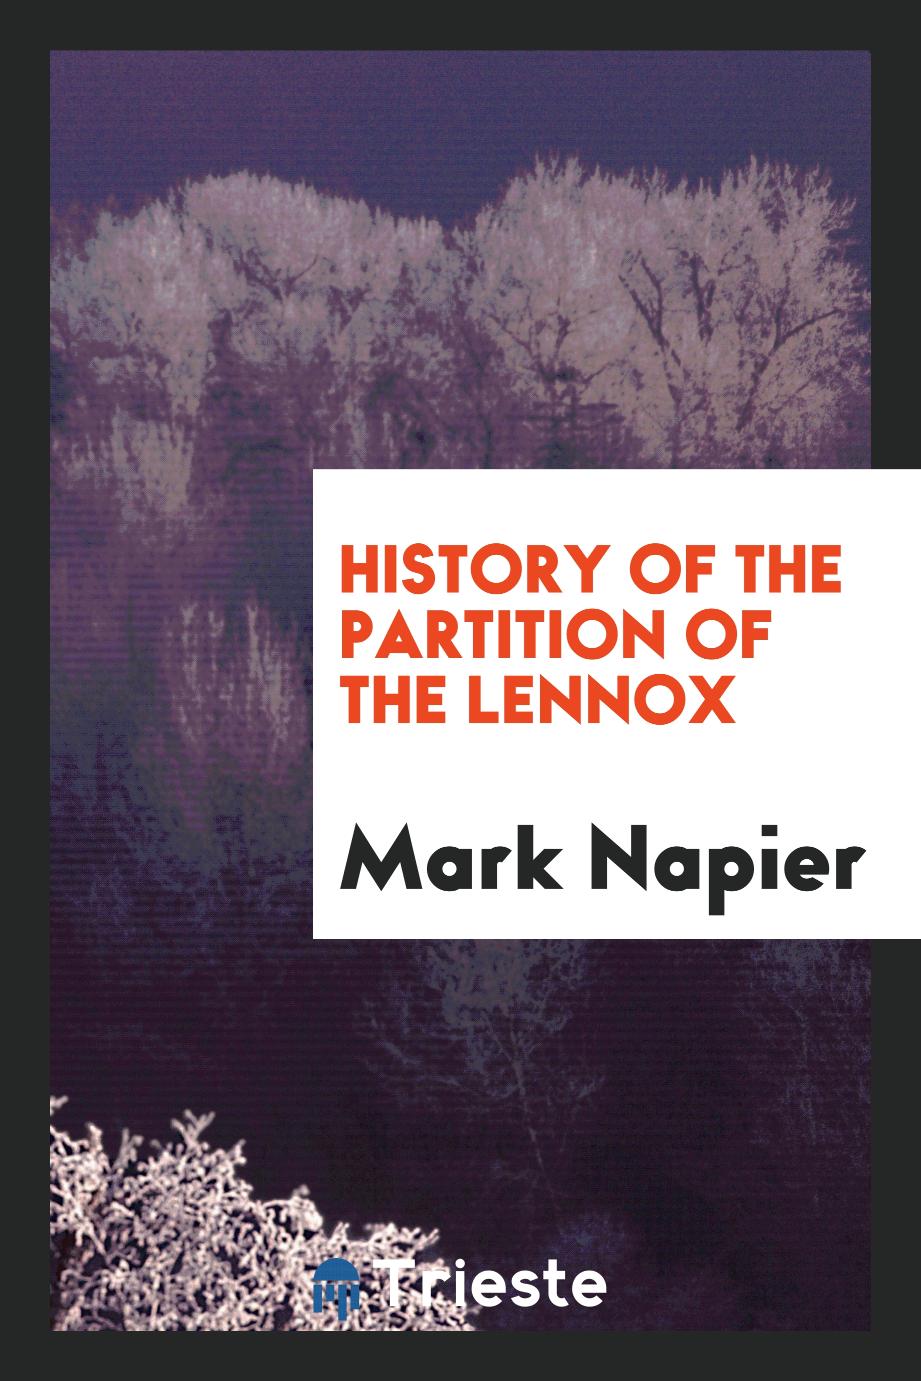 History of the partition of the Lennox